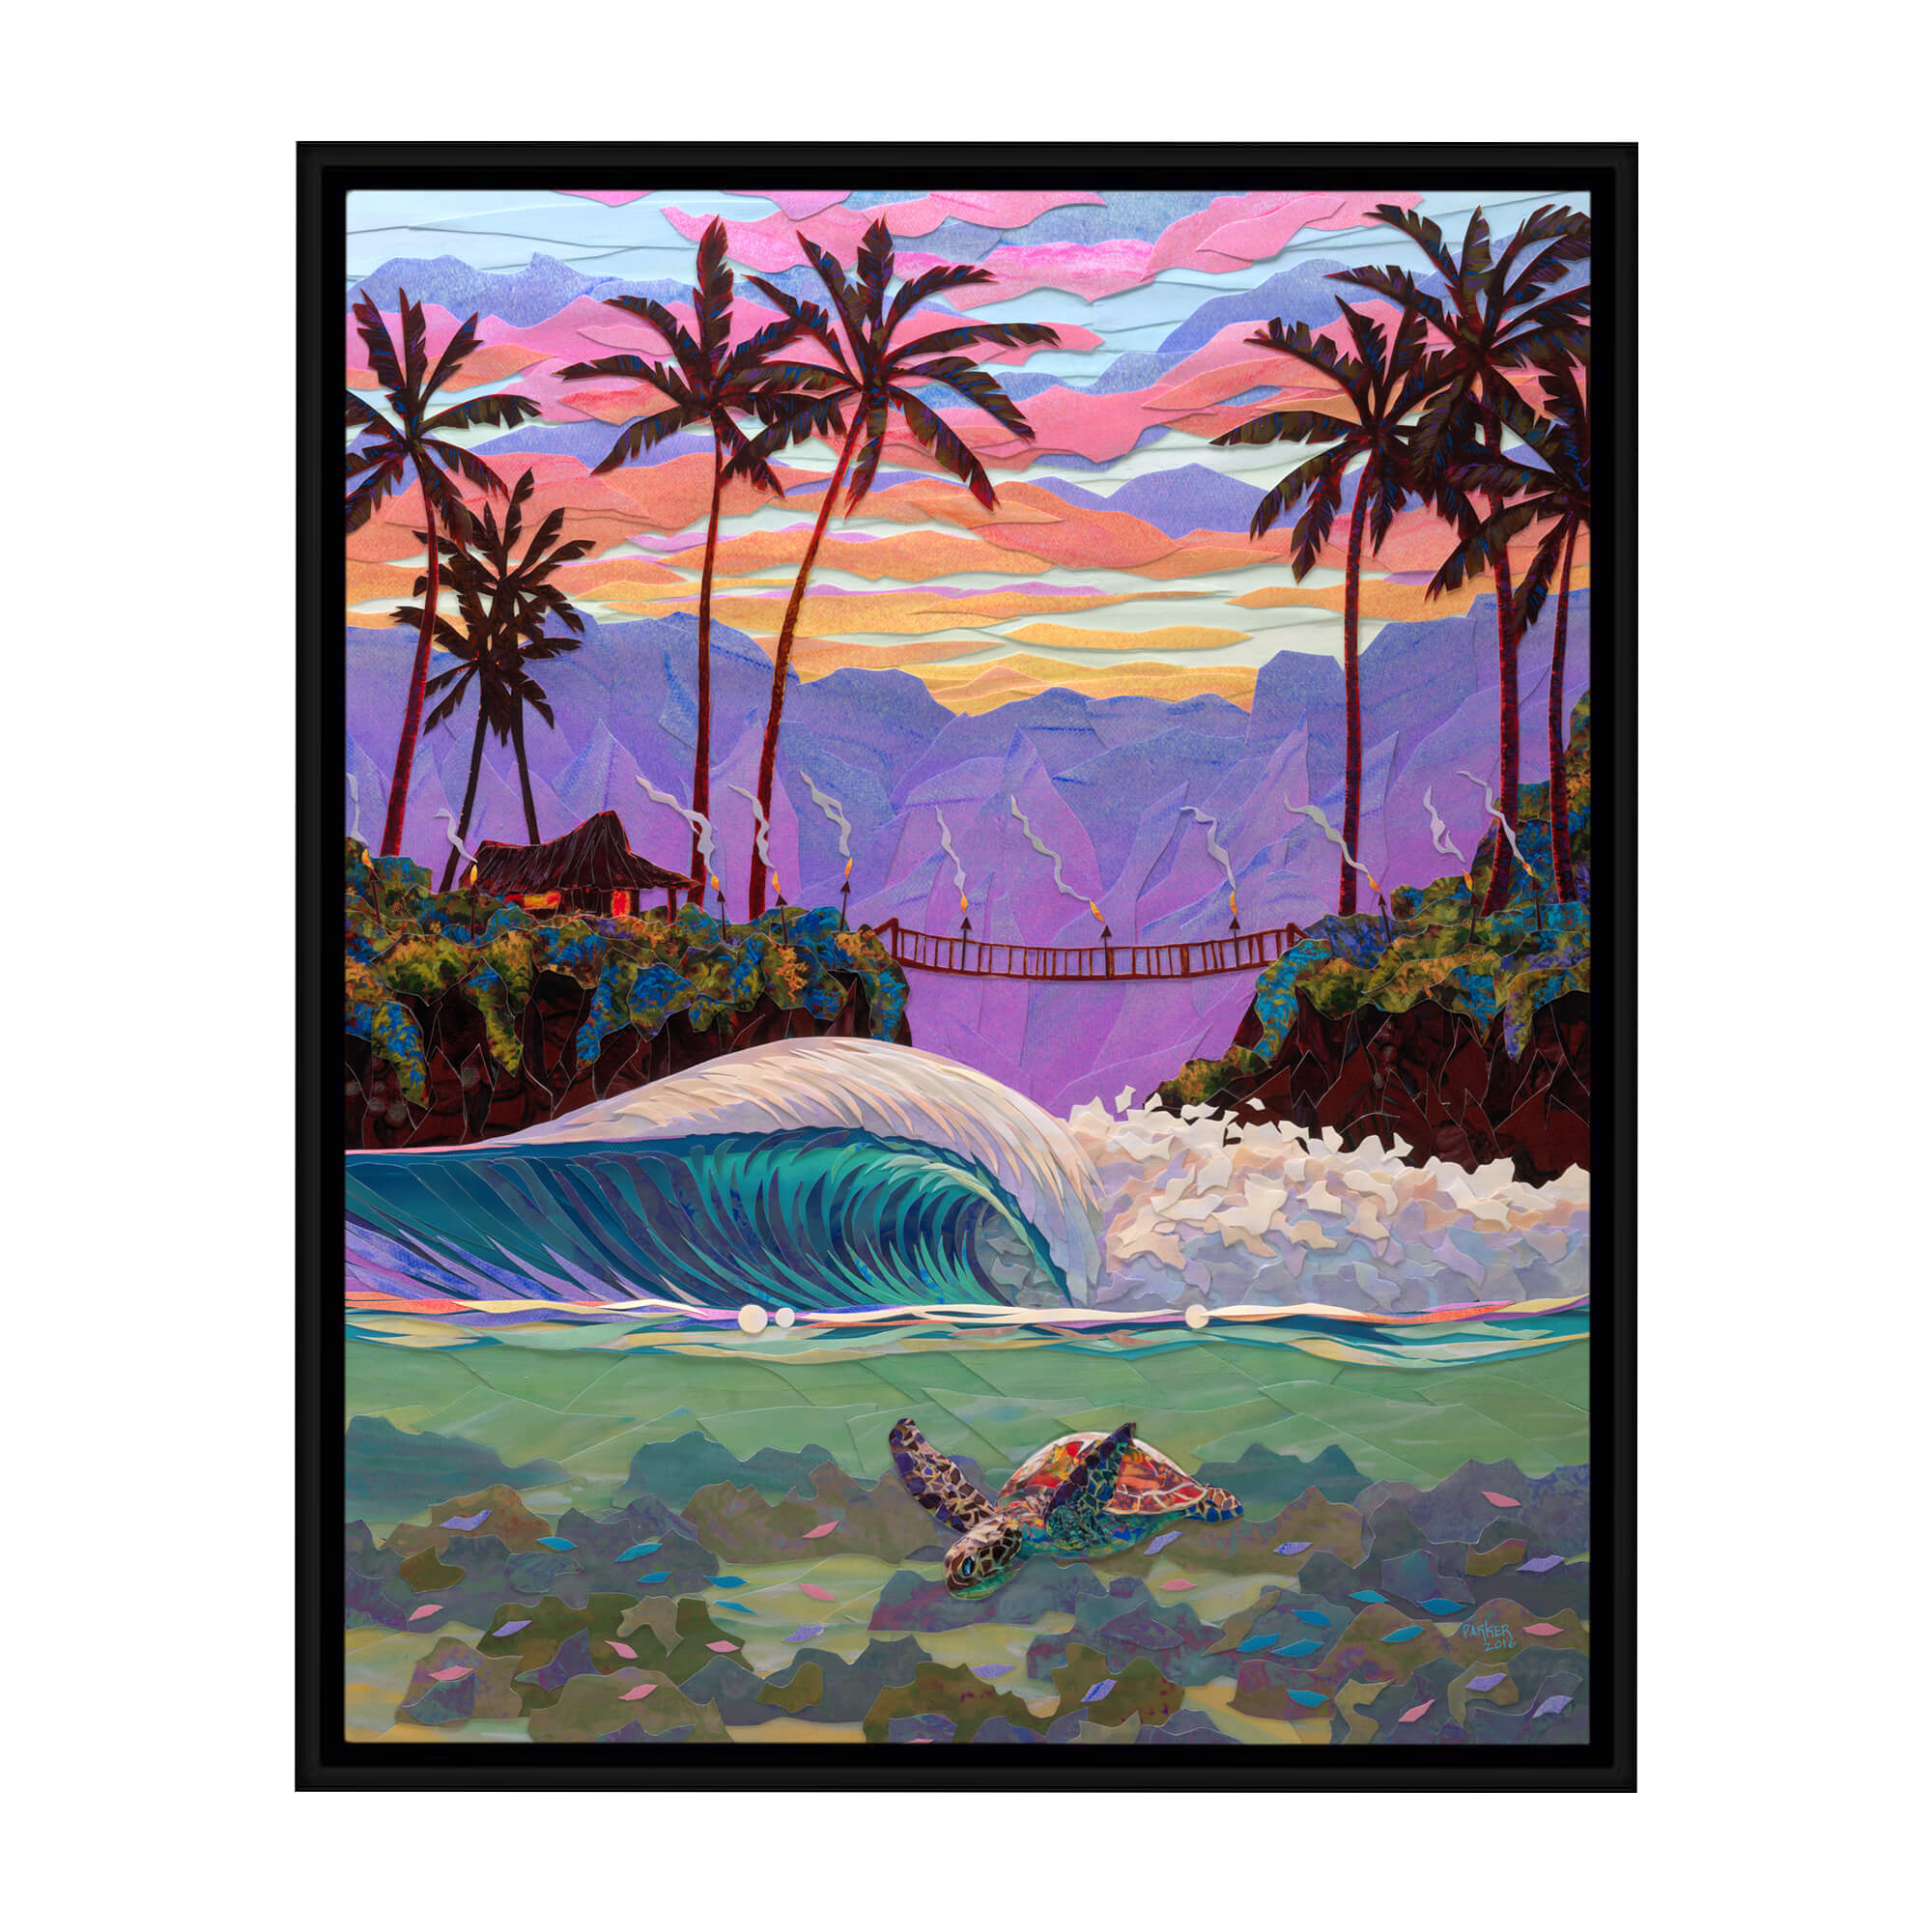 A framed canvas giclée art print featuring a collage of a beautiful seascape with a sea turtle swimming, a hut, and a gradient purple-pink-hued mountain background by Hawaii artist Patrick Parker